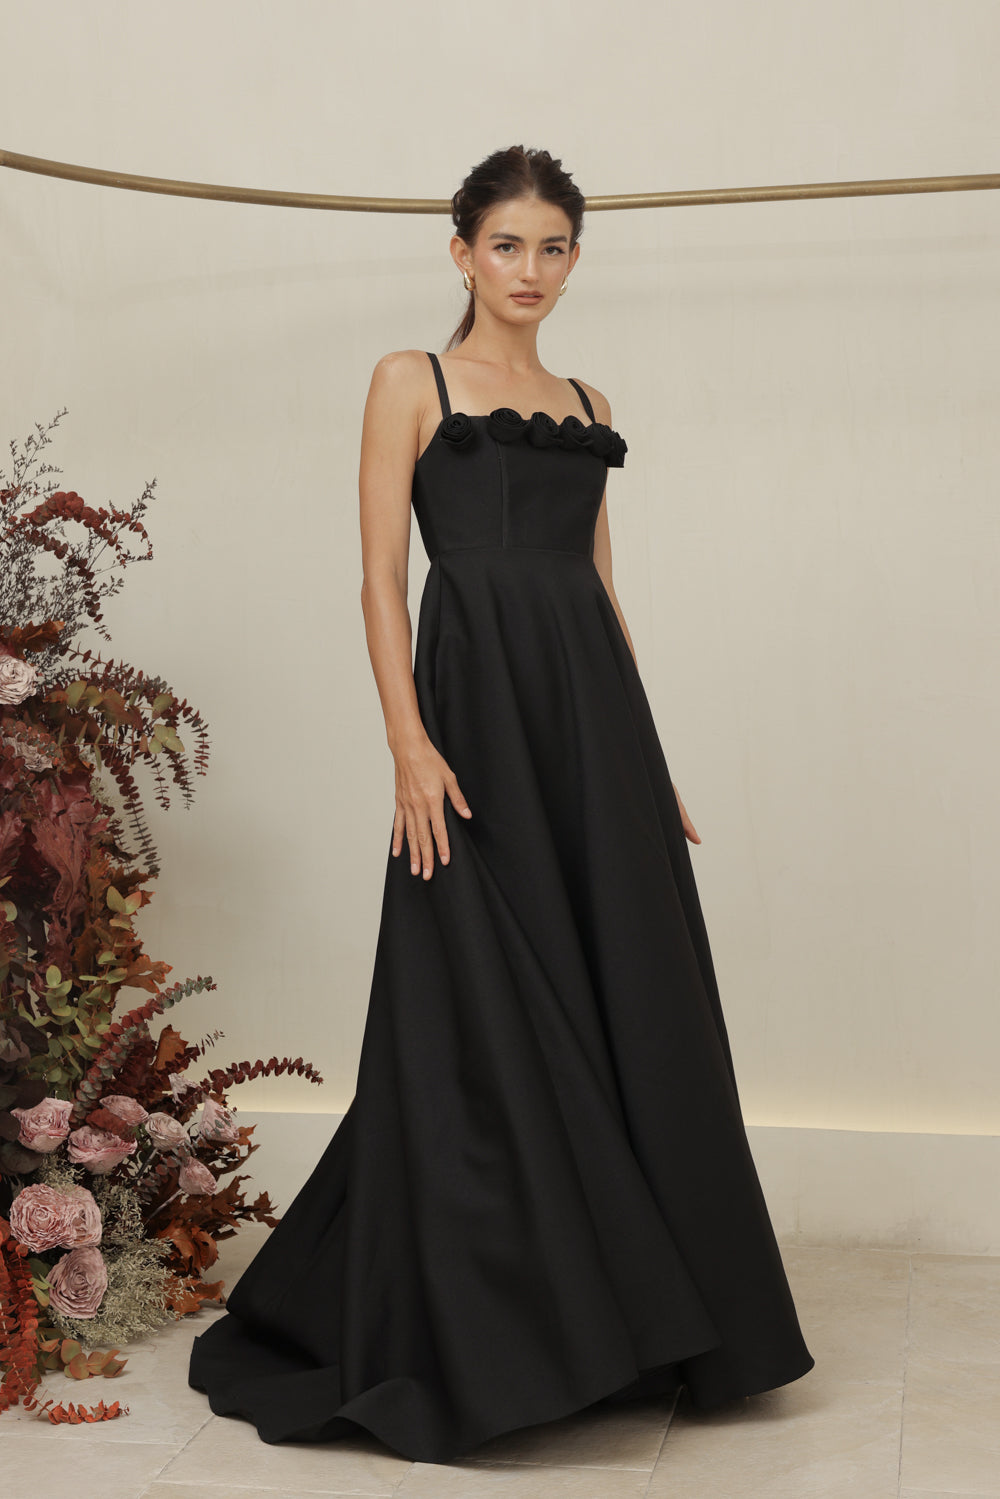 MARCELINE DRESS Straight Neckline Strappy Maxi Gown with Floral Details and Pockets (Black Gazaar)